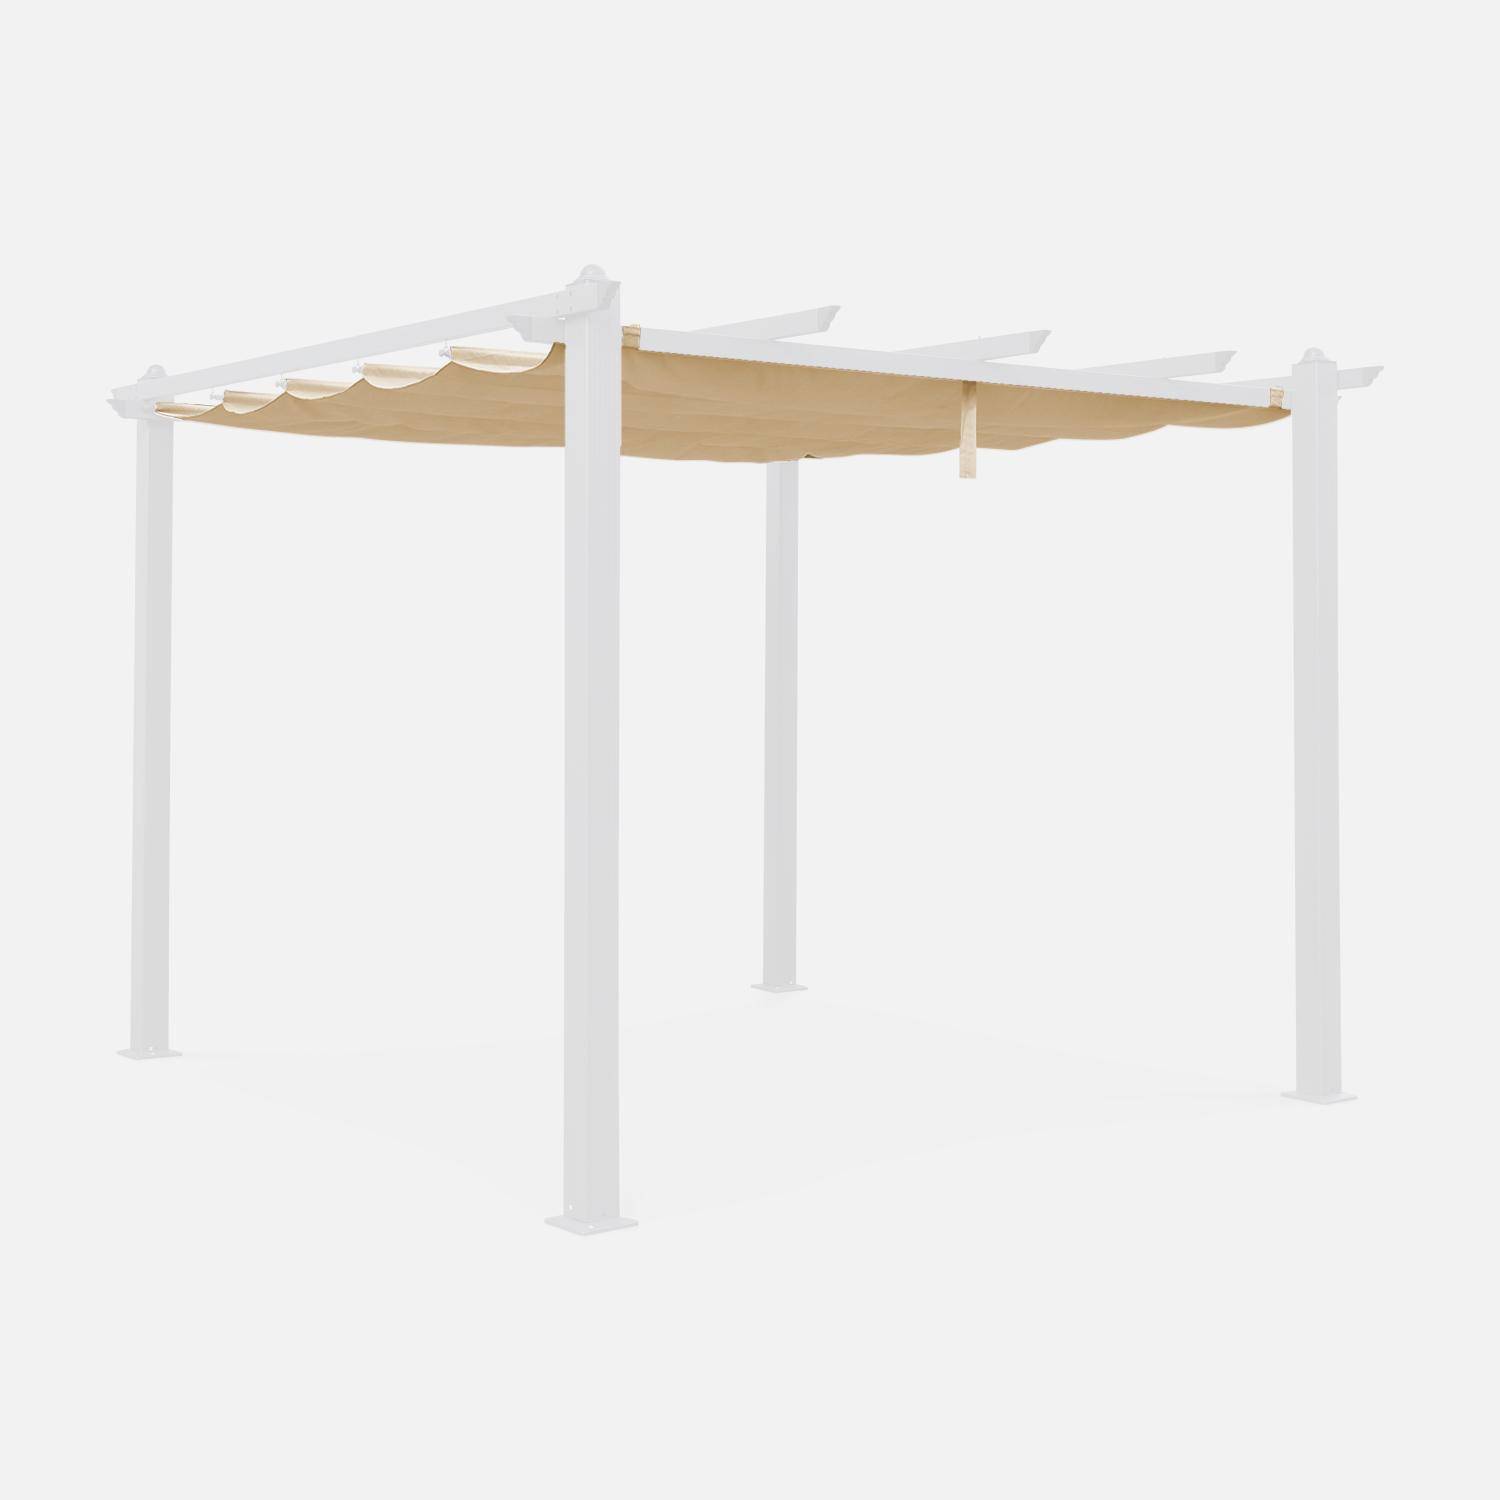 Canopy roof for 3x3m Condate gazebo - pergola replacement canopy - Beige Photo1